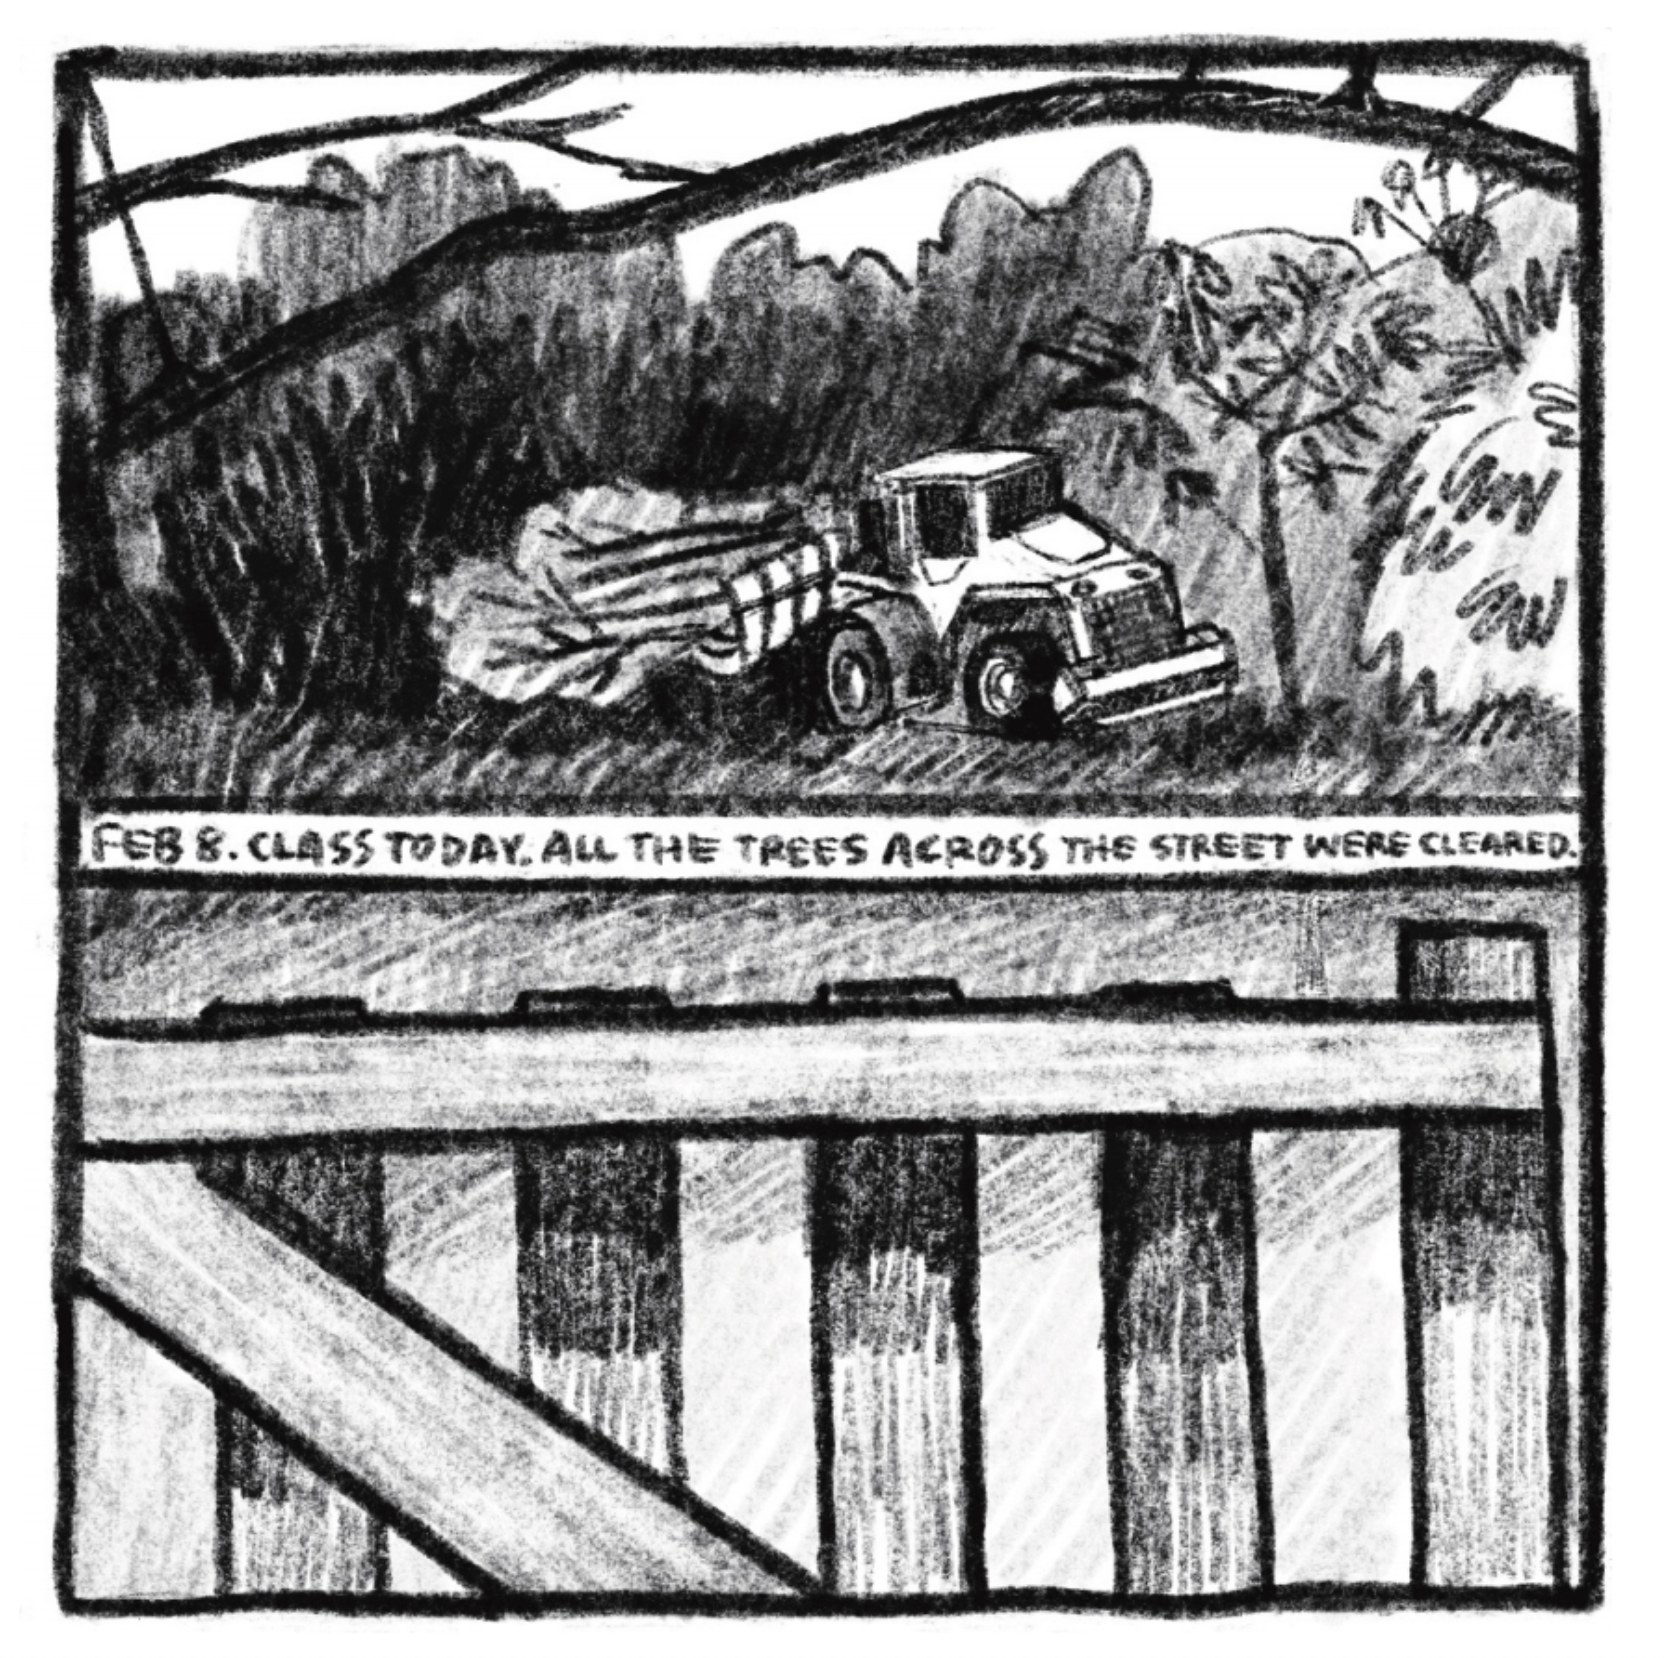 Hold Still Episode 7, panel 4. "Feb 8. Class today. All the trees across the street were cleared." Drawing of bulldozer clearing trees past a fence.